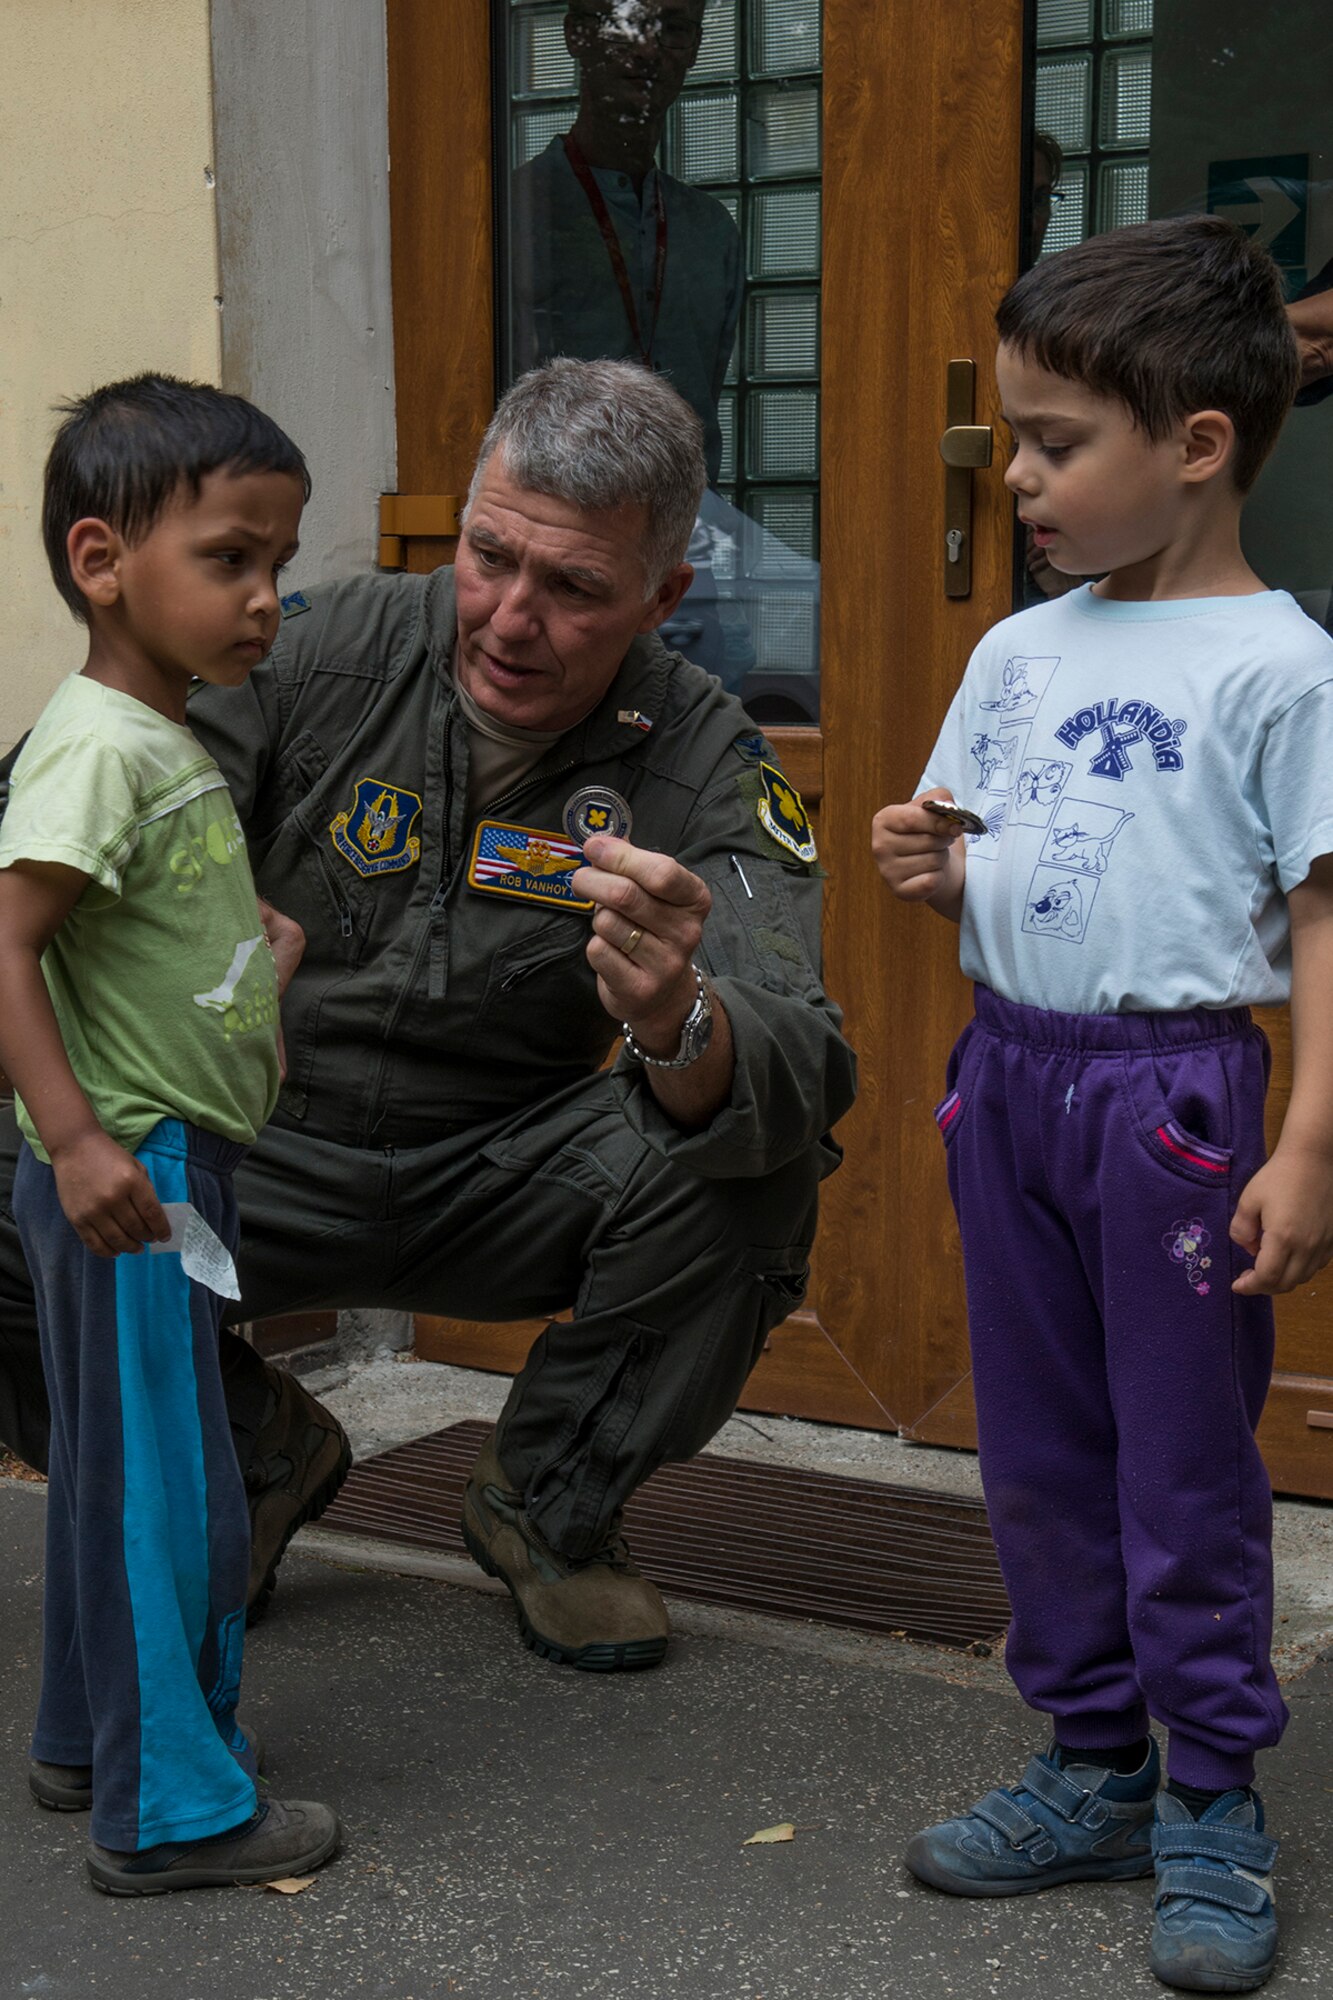 U.S. Air Force Reserve Col. Robert VanHoy, 307th Bomb Wing commander, gives a wing coin to a boy at the Children’s Center orphanage on Sept. 13, 2018, Ostrava, Czech Republic. The children’s home is a nongovernment medical organization with a nonstop service and is designed generally for children ages new born to 3. (U.S. Air Force photo by Master Sgt. Greg Steele)